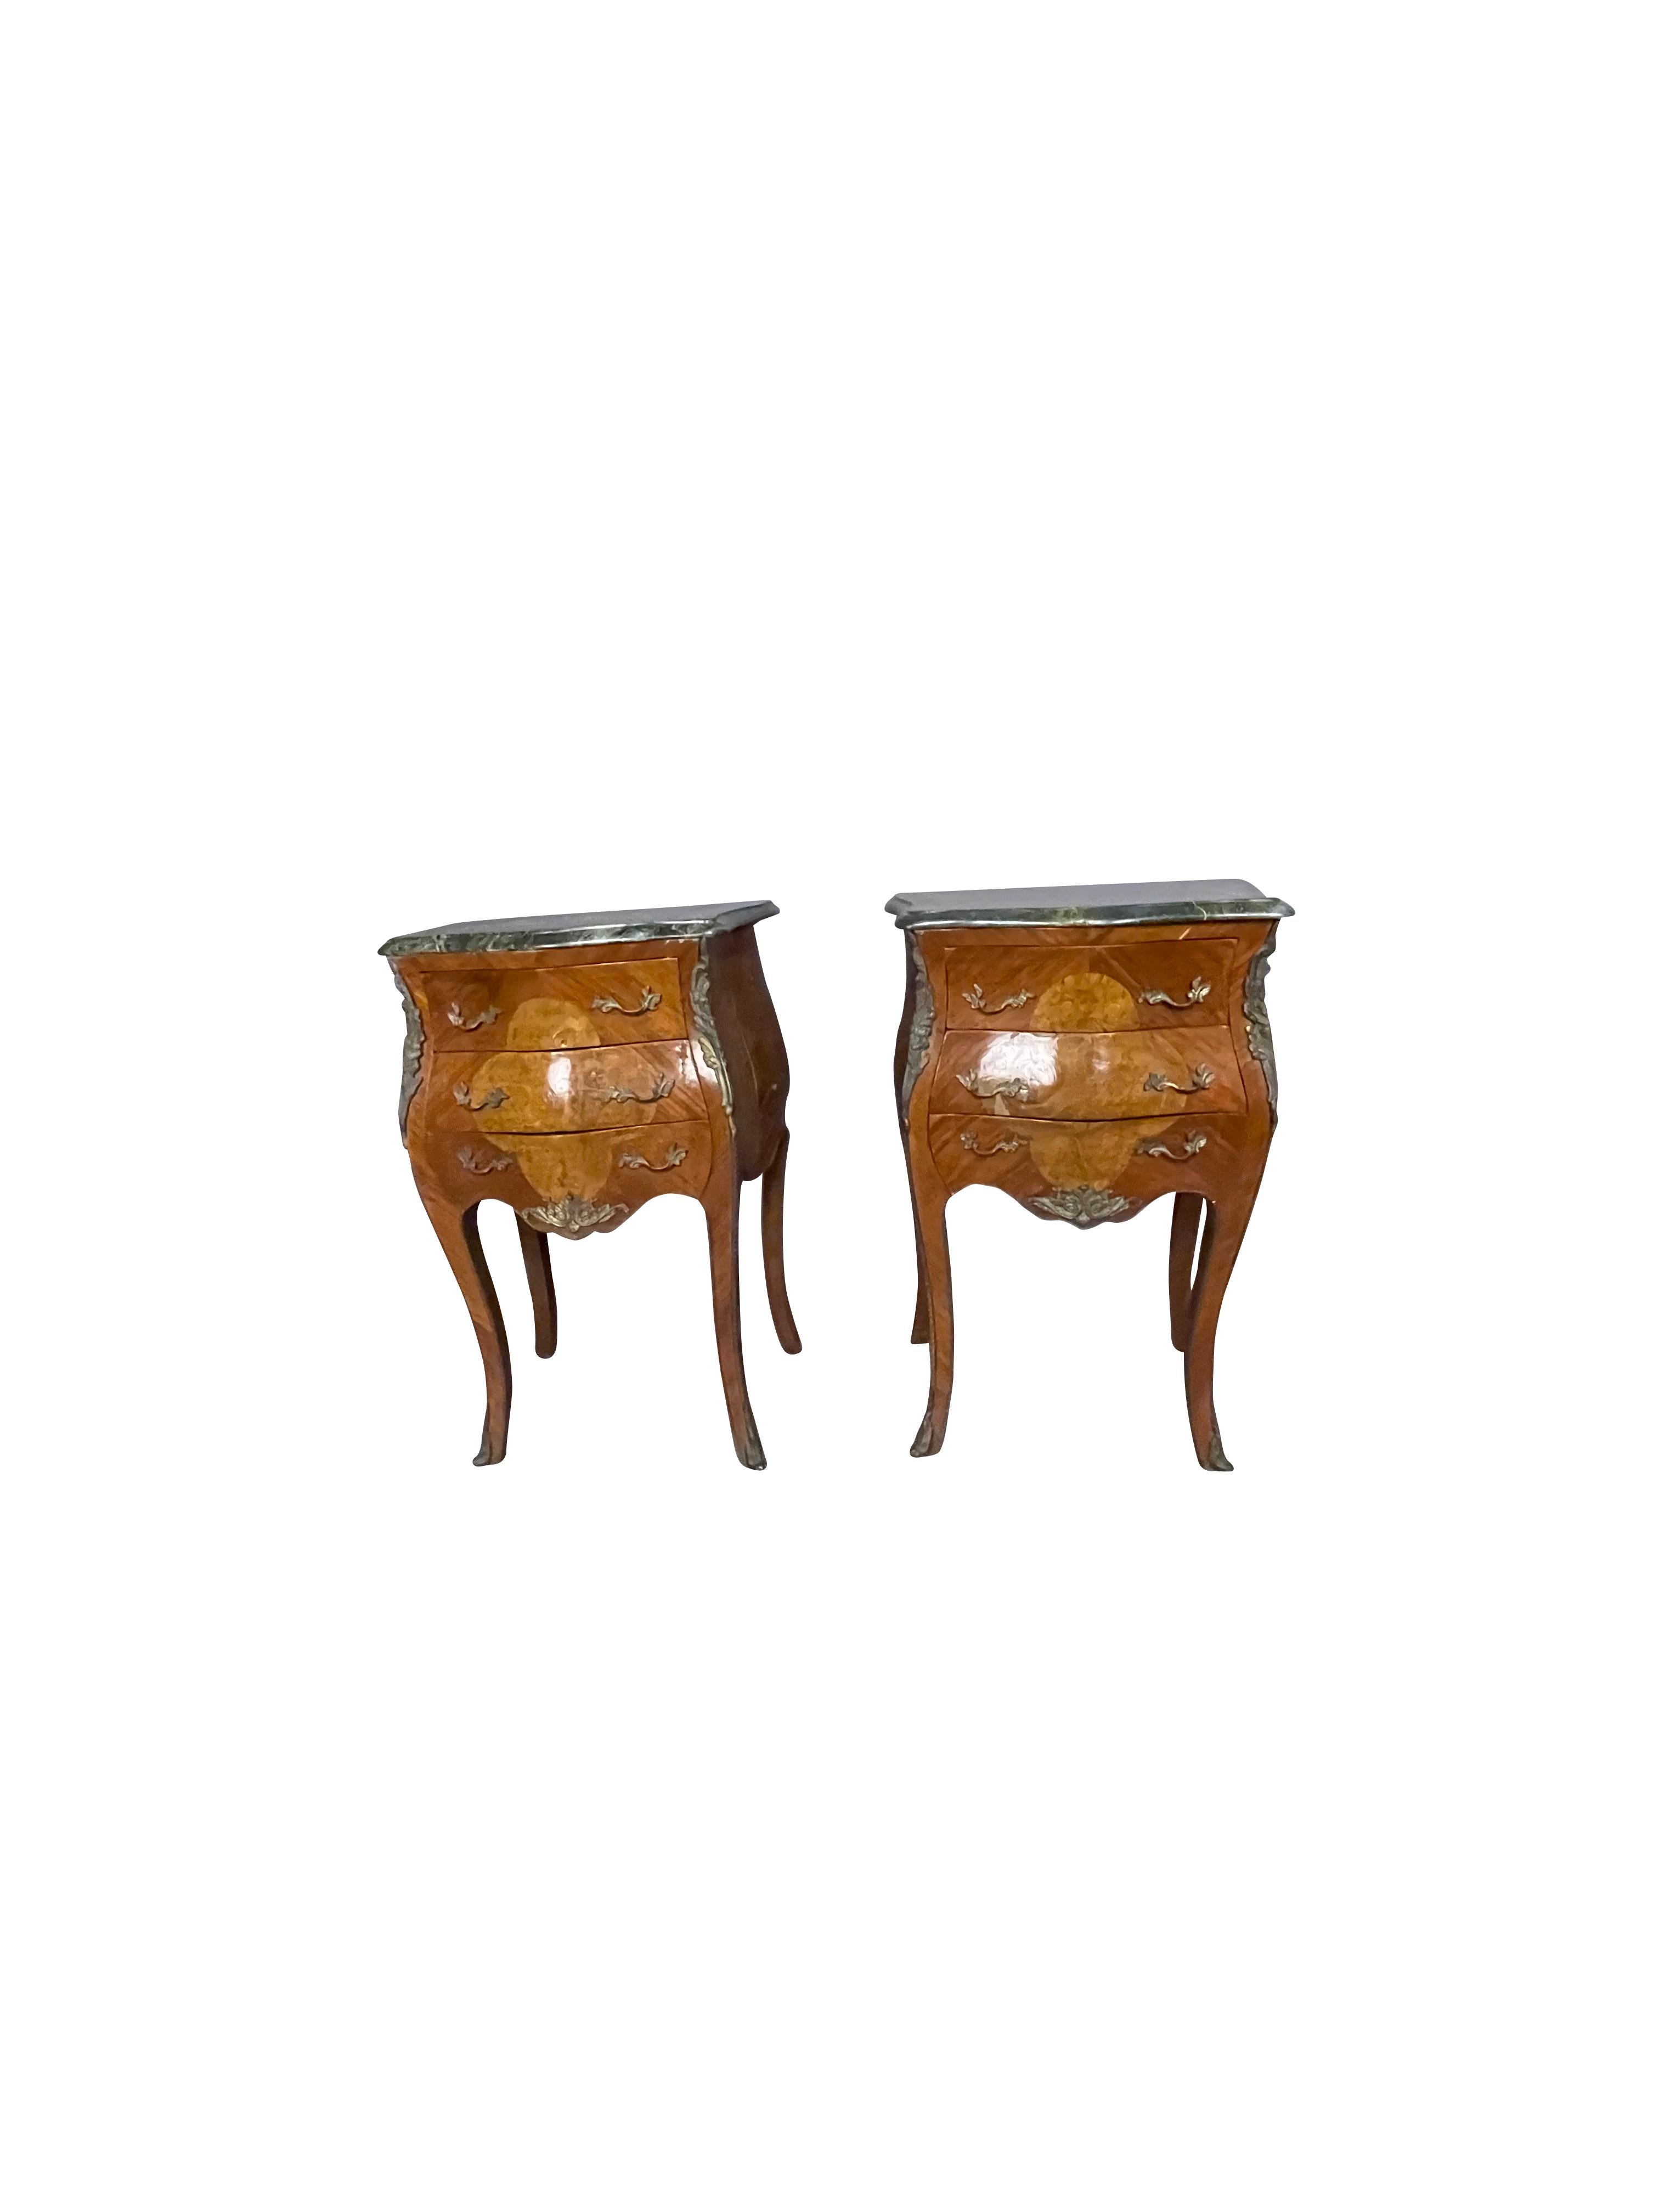 Classic Louis XVI style end table or nightstands with classic ormolu mounts and green marble tops. Wonderful patina to the veneer.